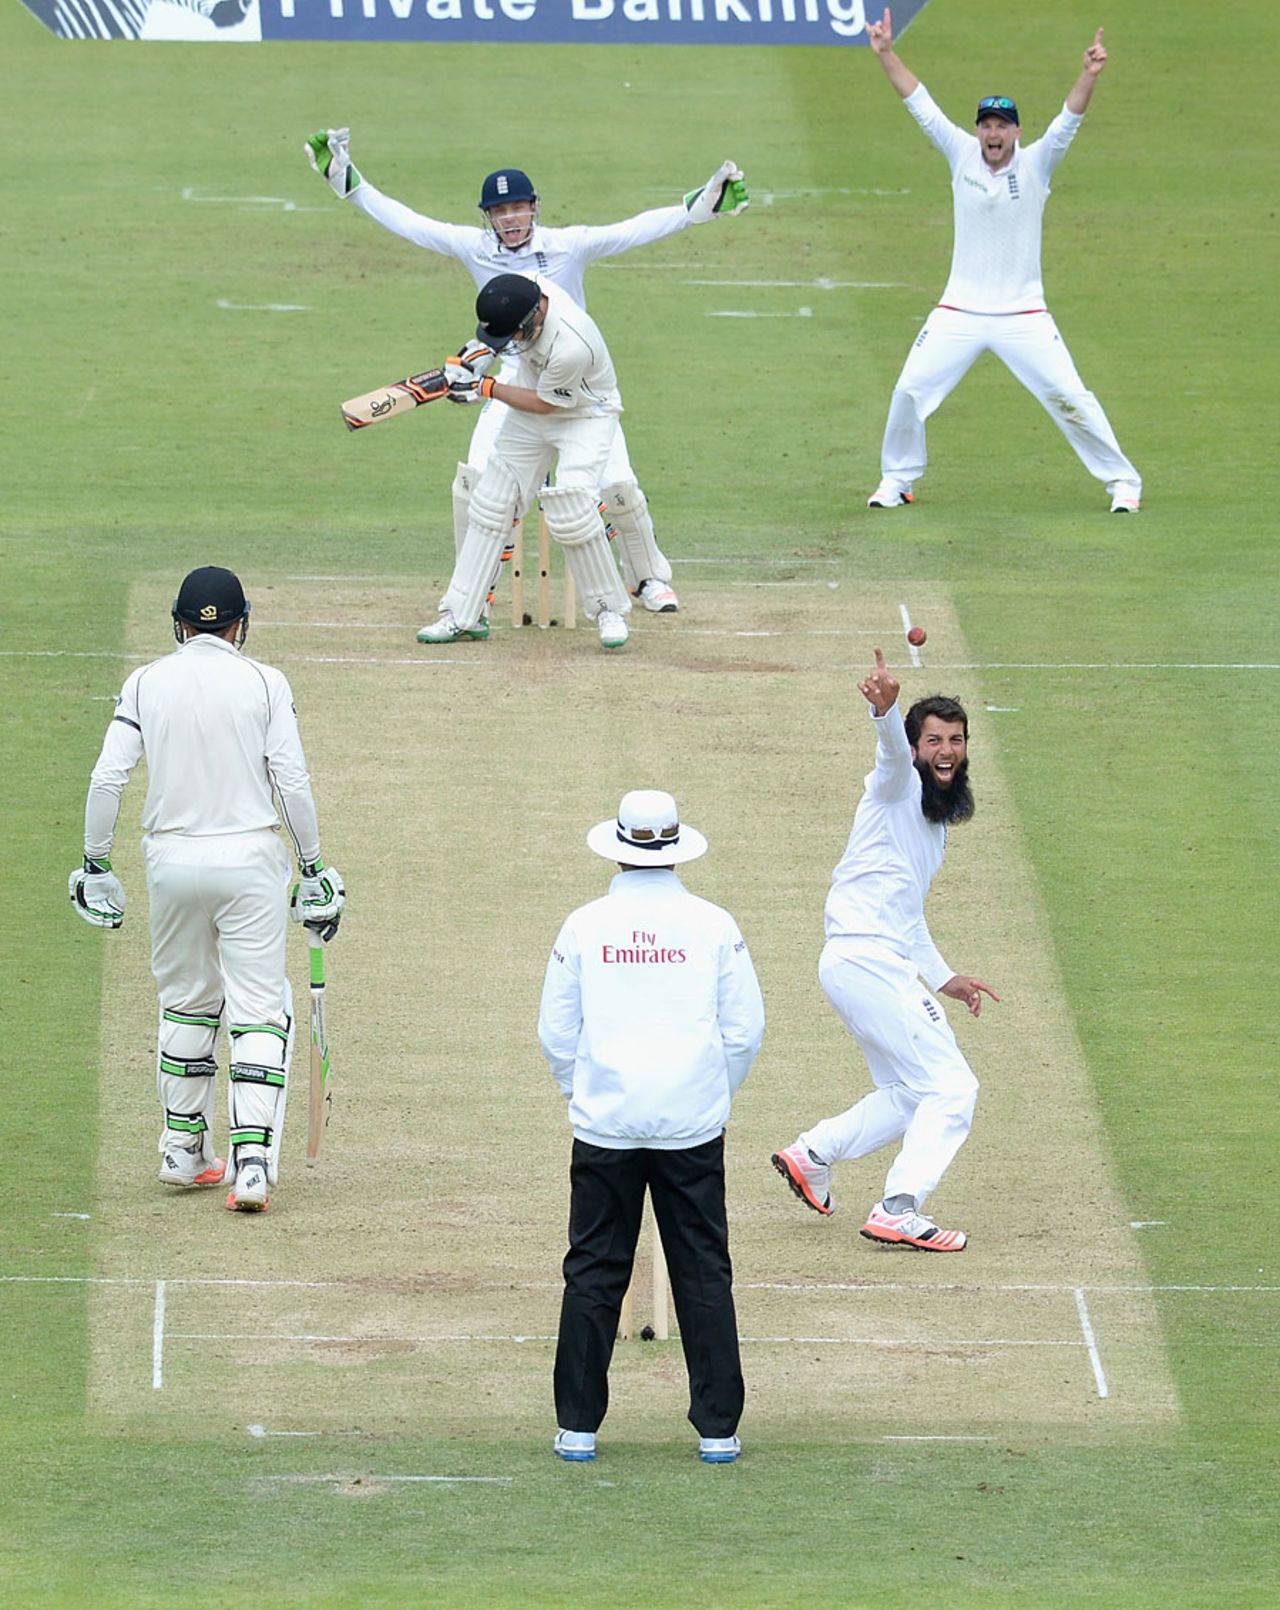 Moeen Ali appeals successfully against Tom Latham, England v New Zealand, 1st Investec Test, Lord's, 2nd day, May 22, 2015